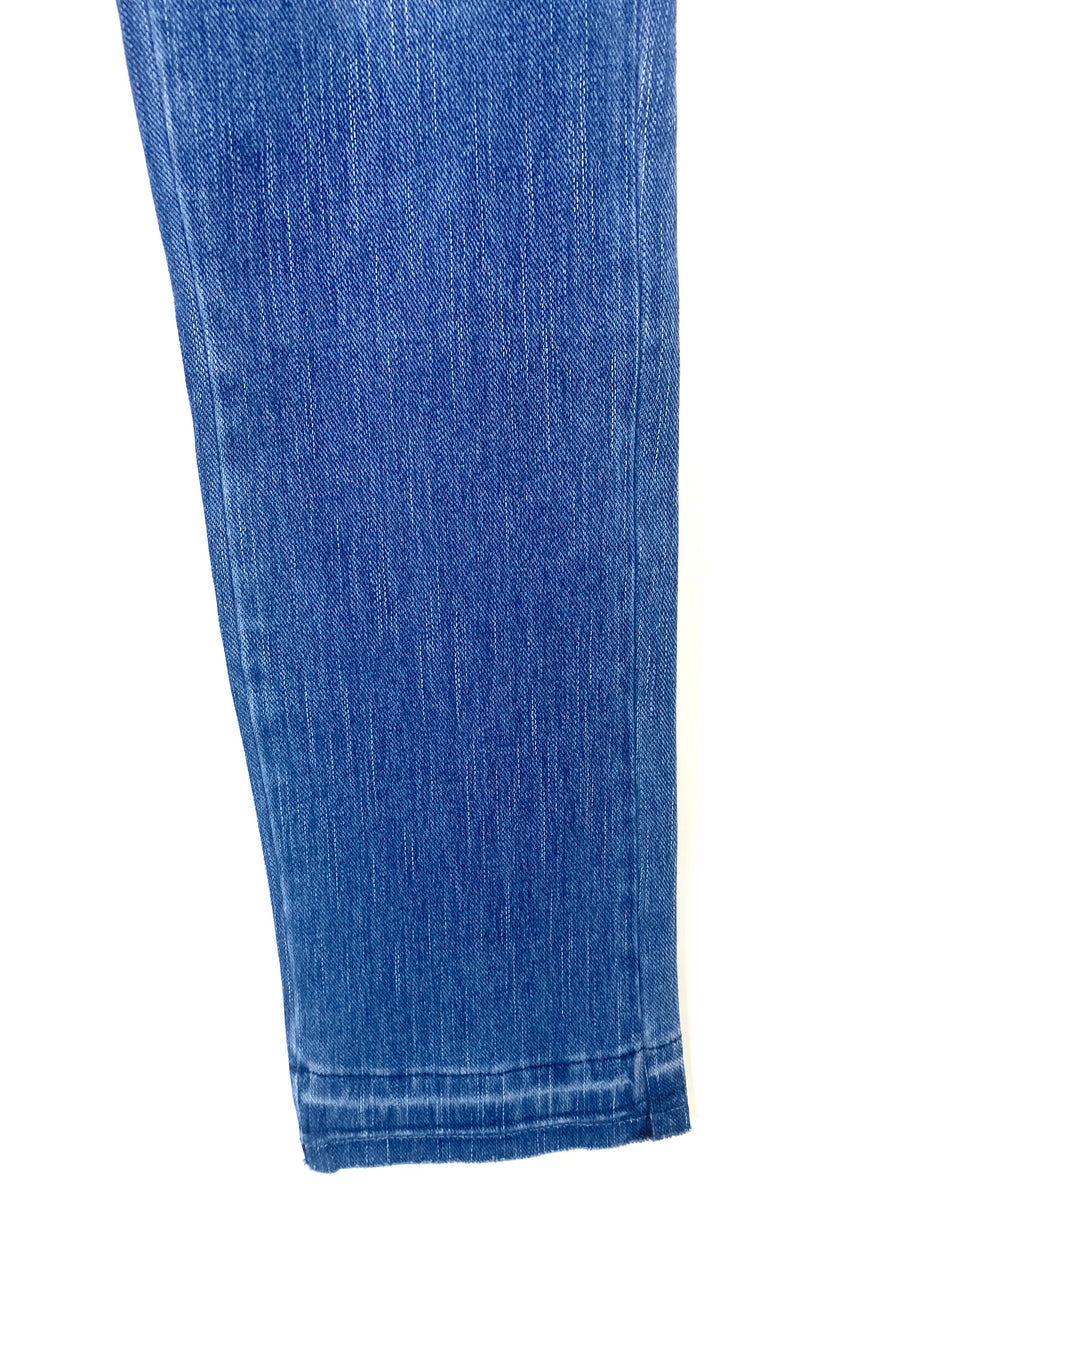 Mid-Wash Blue Jeans With Tie-Dyed Ends  - Size 6/8